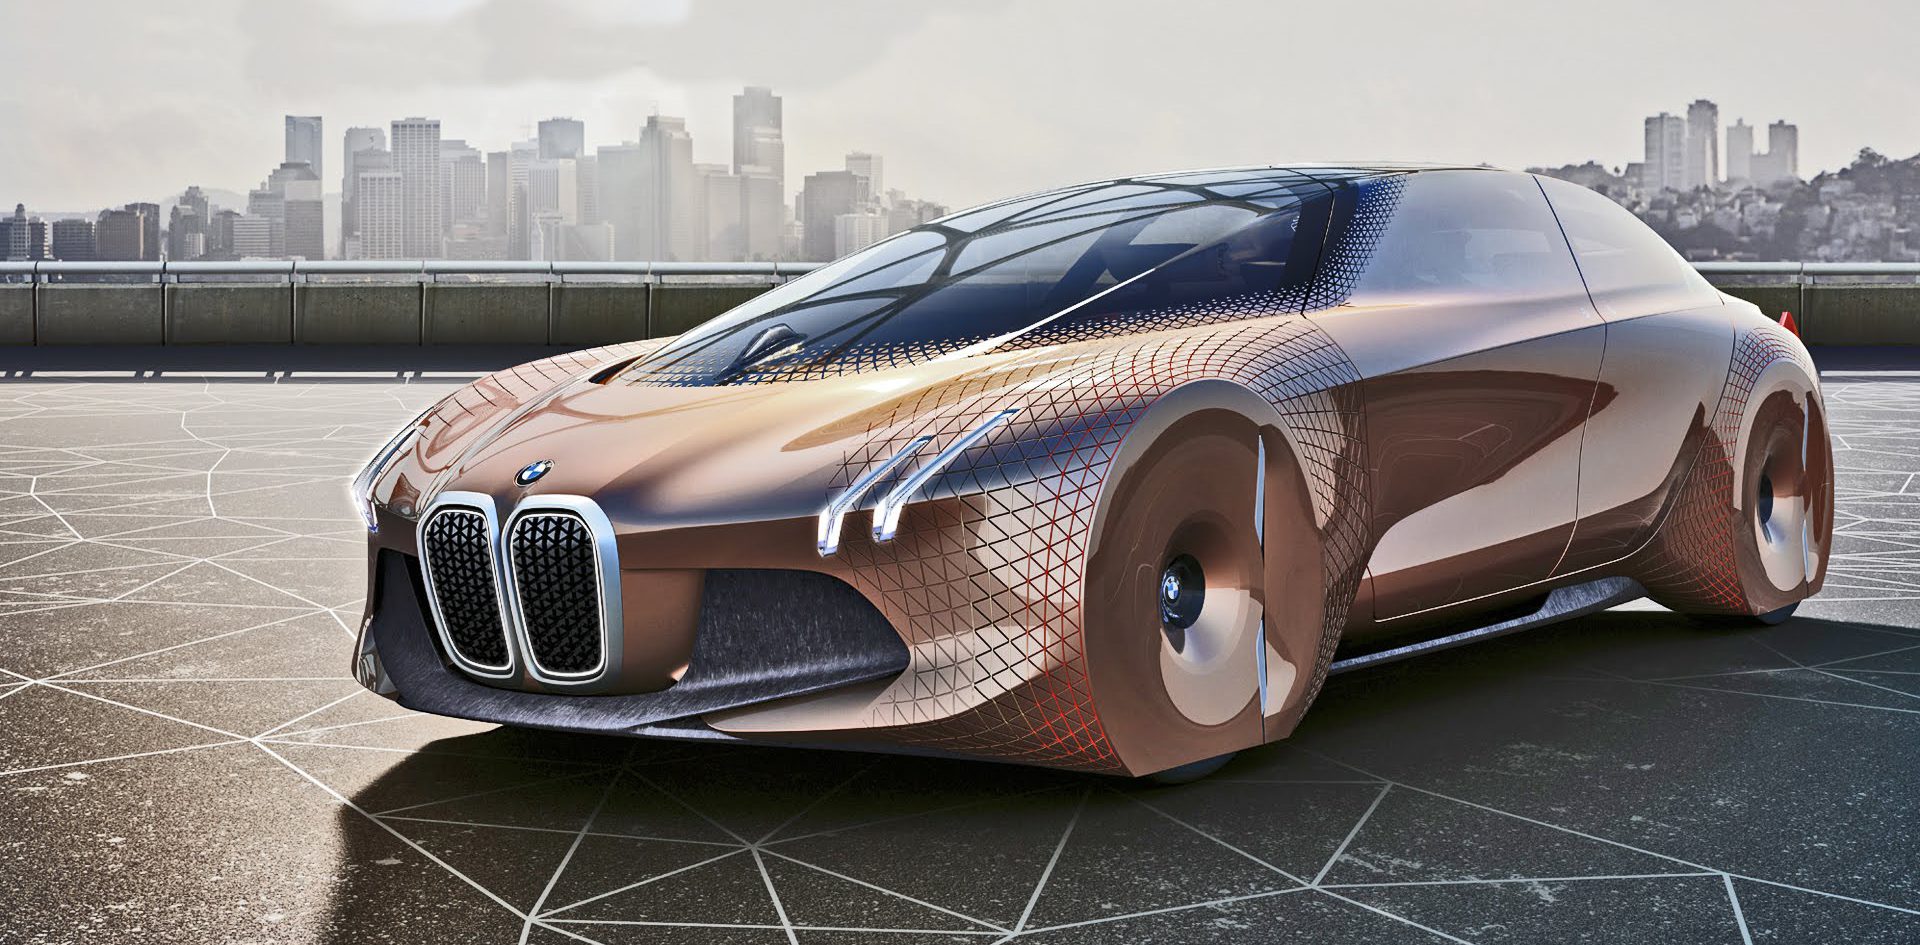 BMW's i5 electric car would actually be a Tesla Model 3